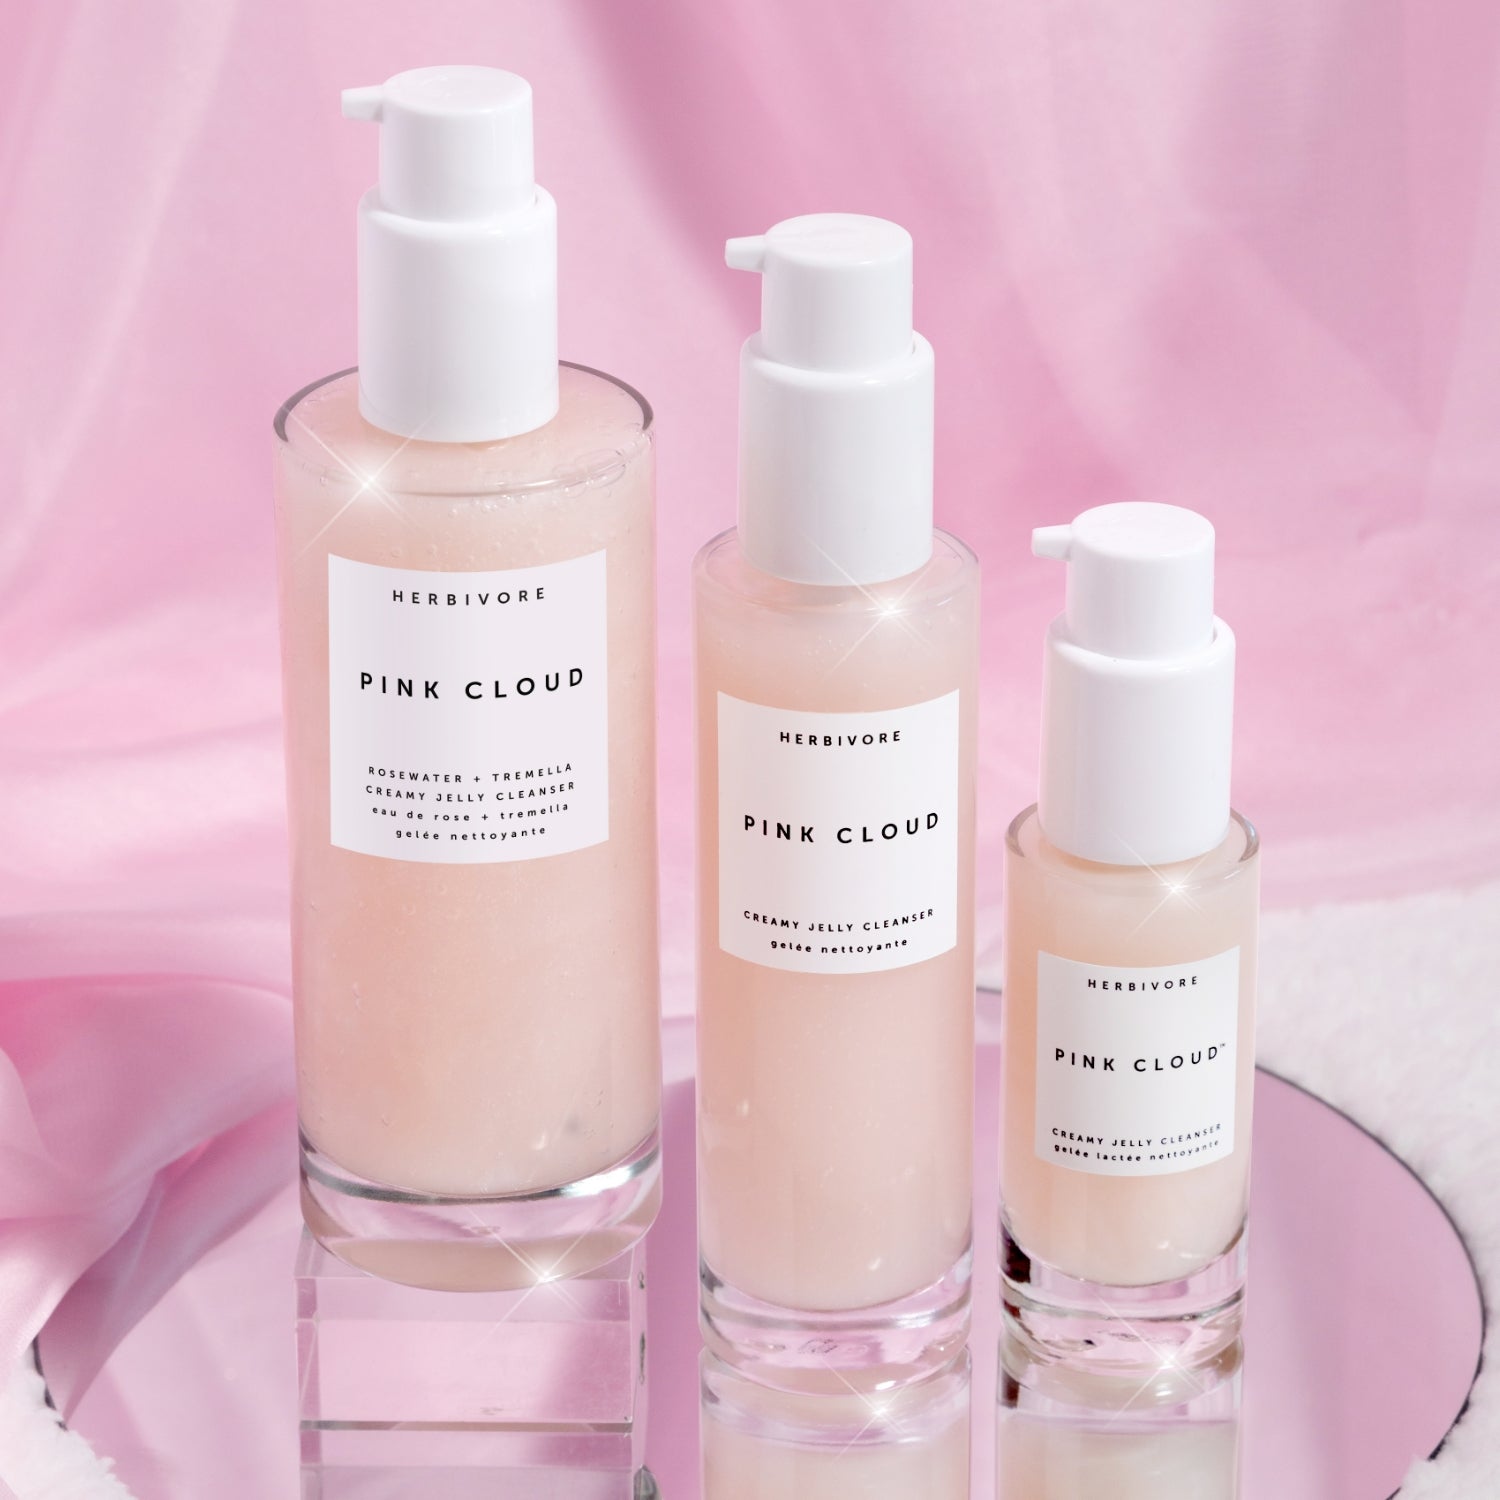 Three sizes of the Pink Cloud Cleanser Collection